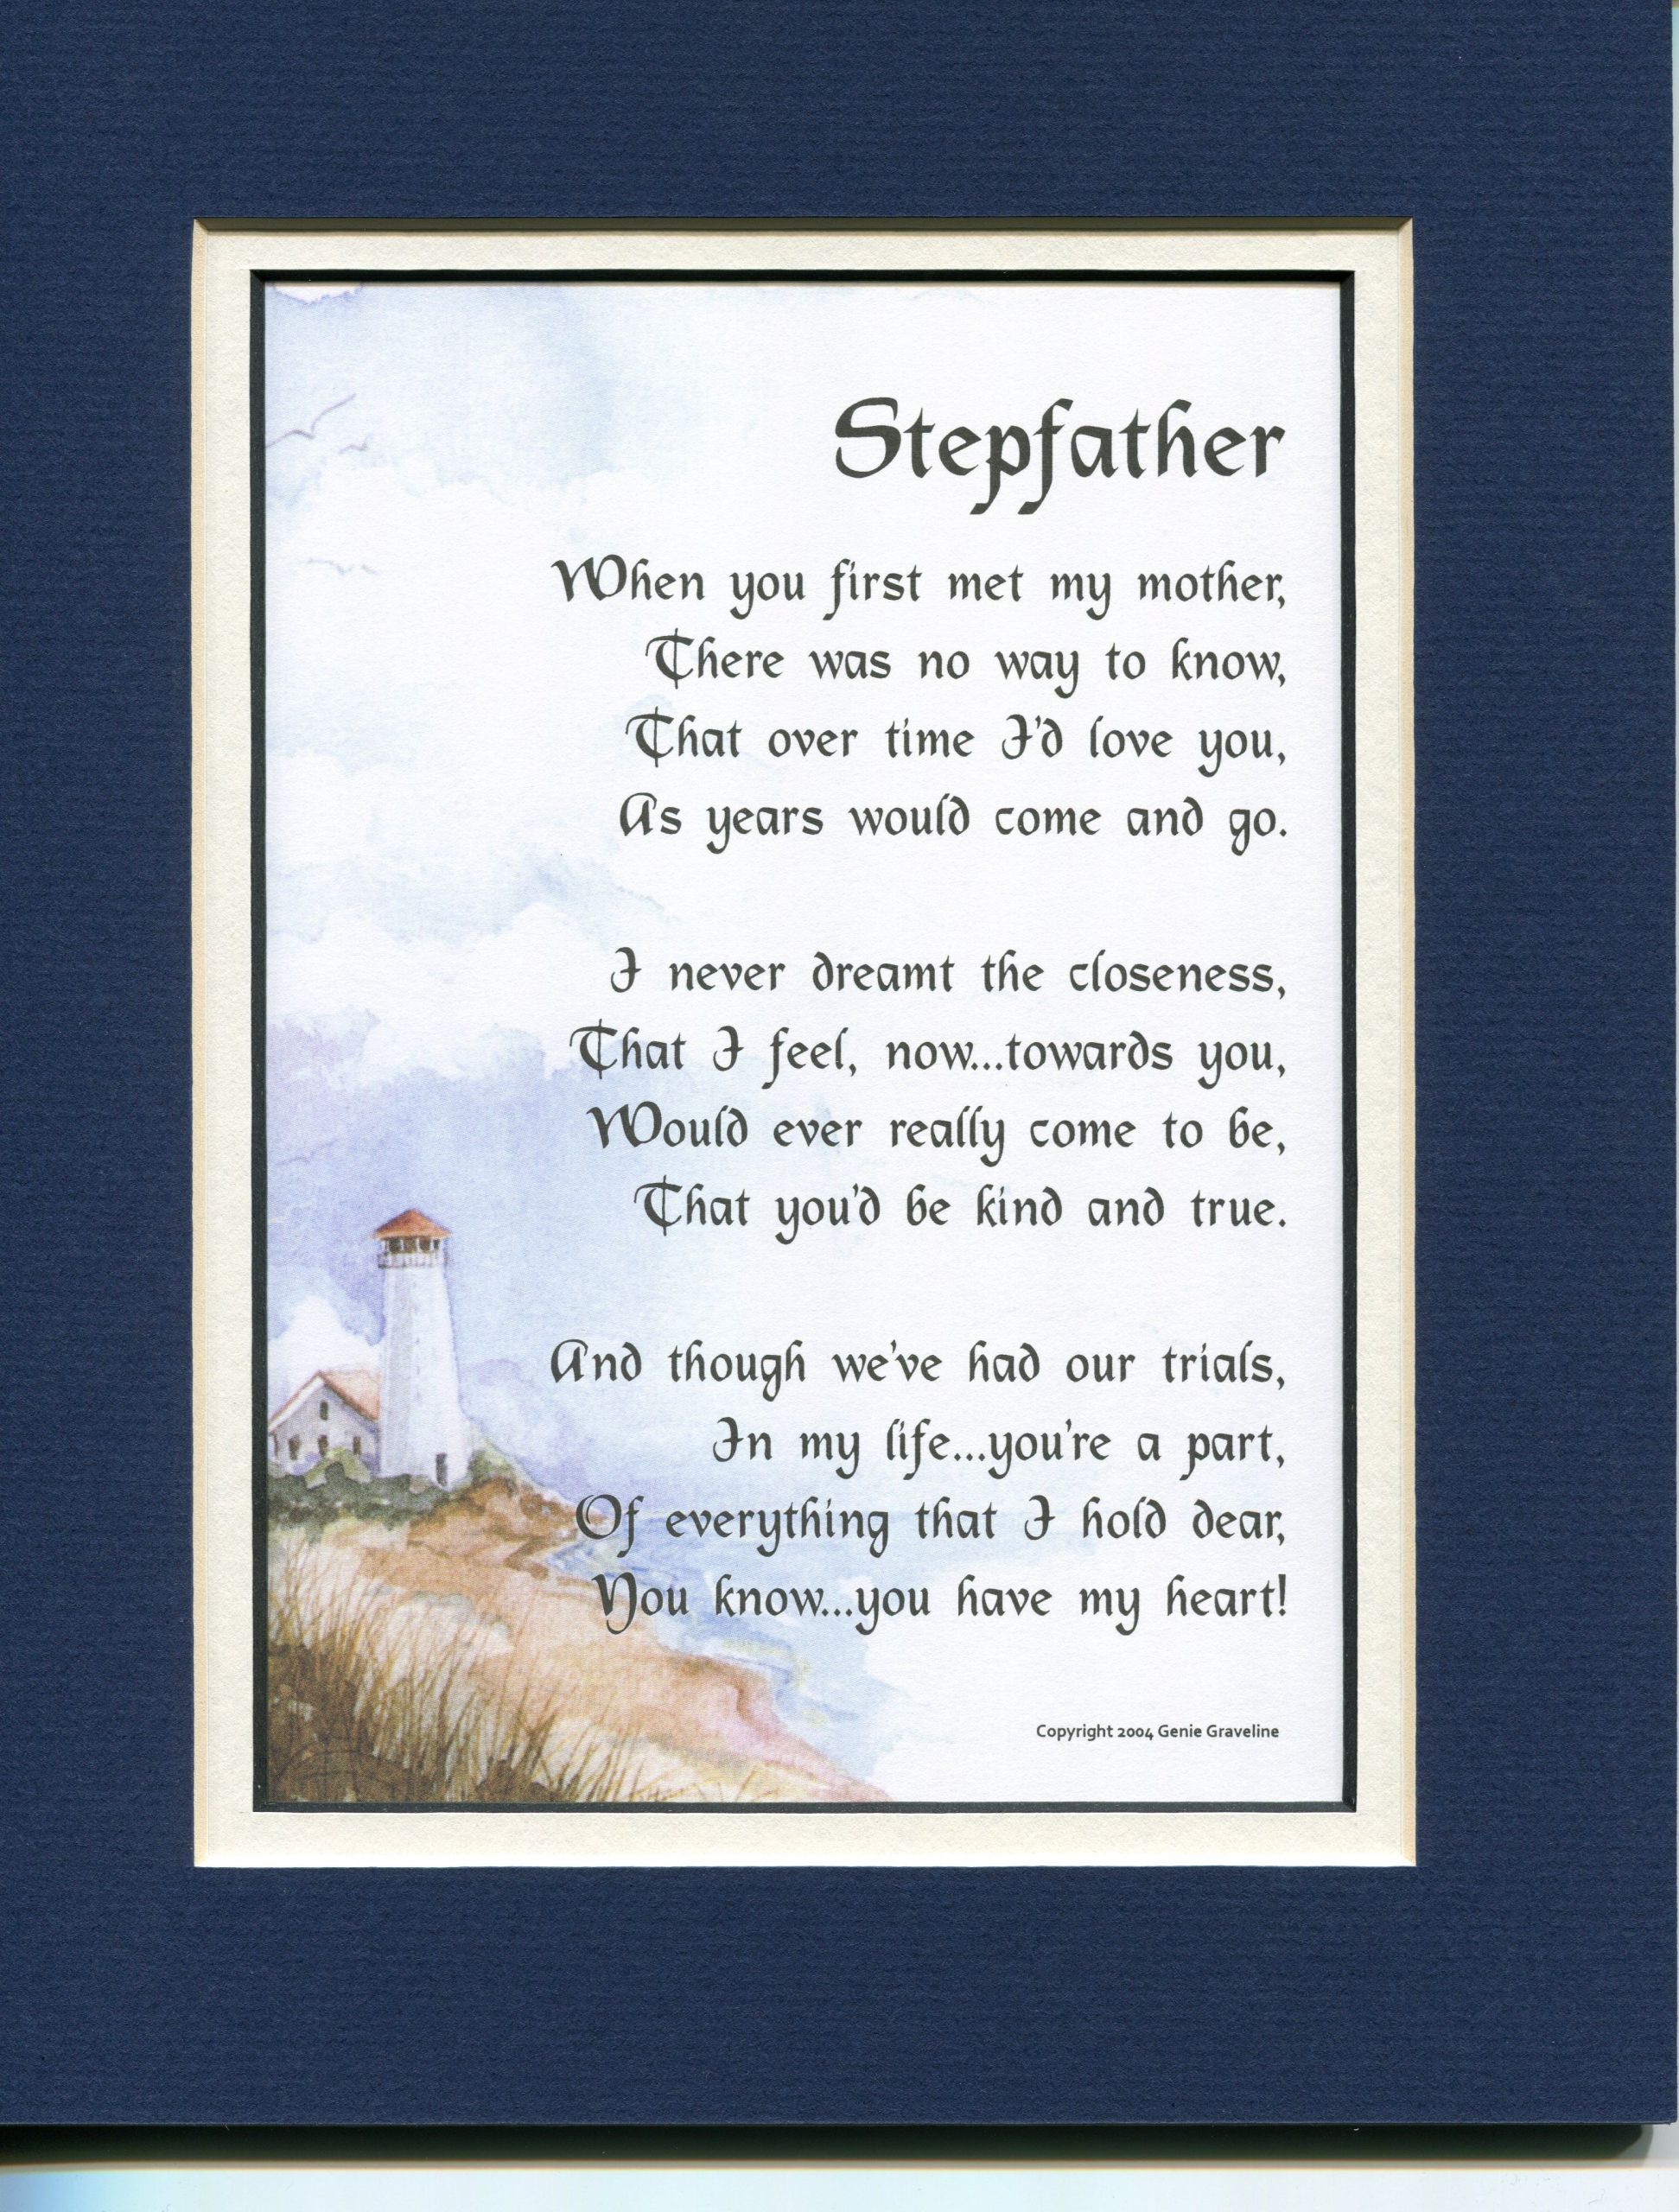 Happy Fathers Day Quotes For Stepdad
 Gifts for stepdad Gifts for stepfathers Fathers Day ts